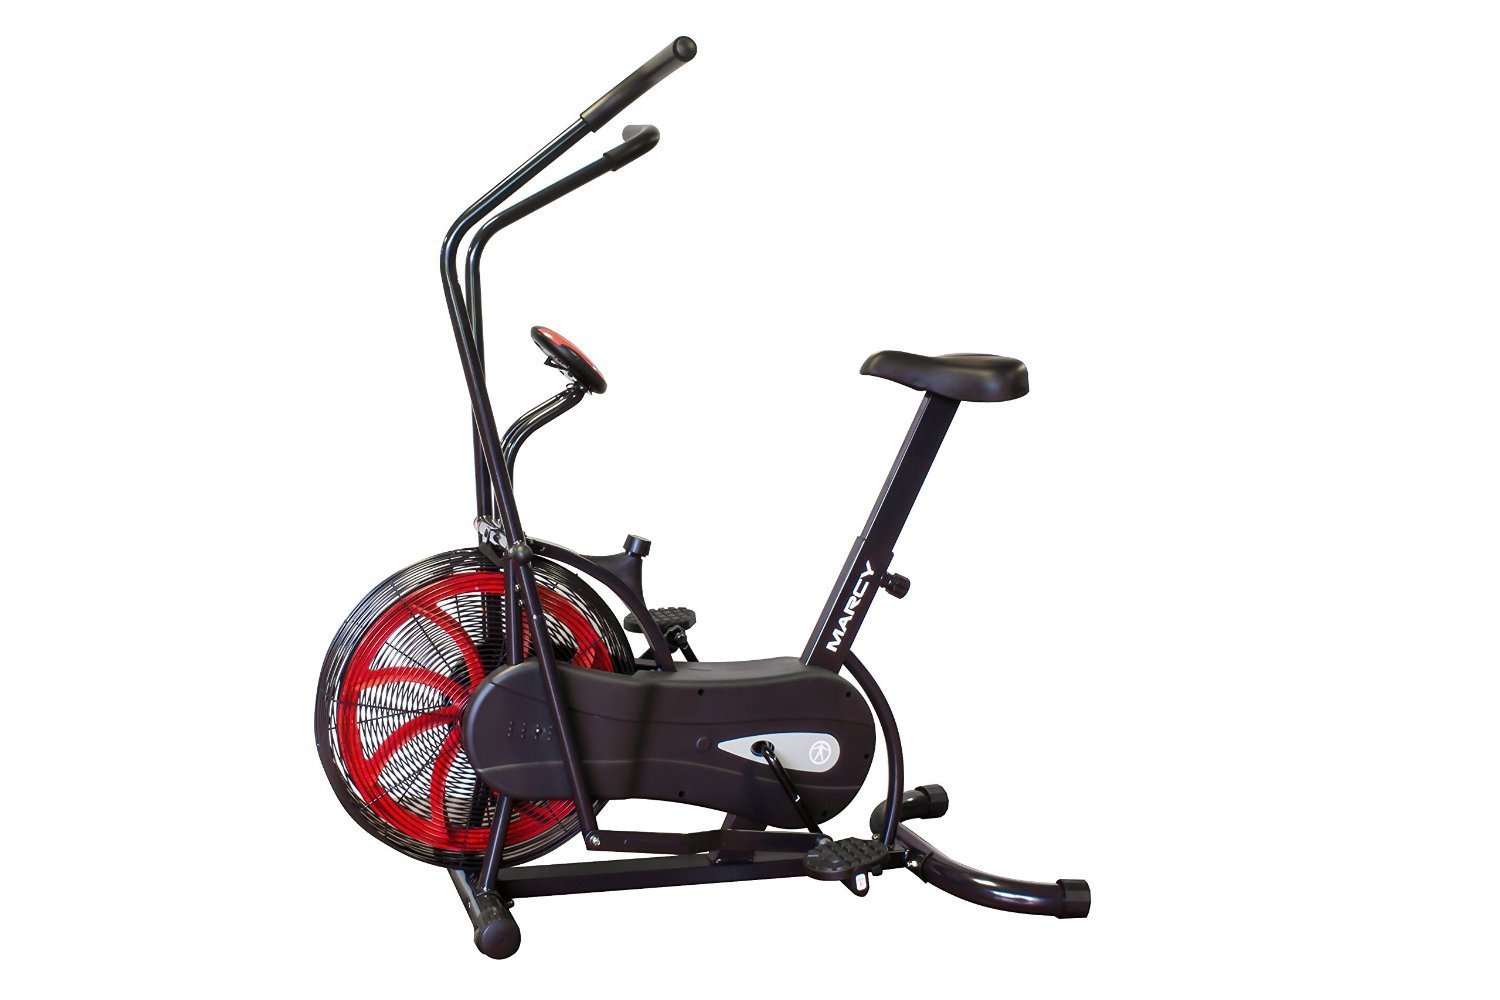 marcy exercise bicycle